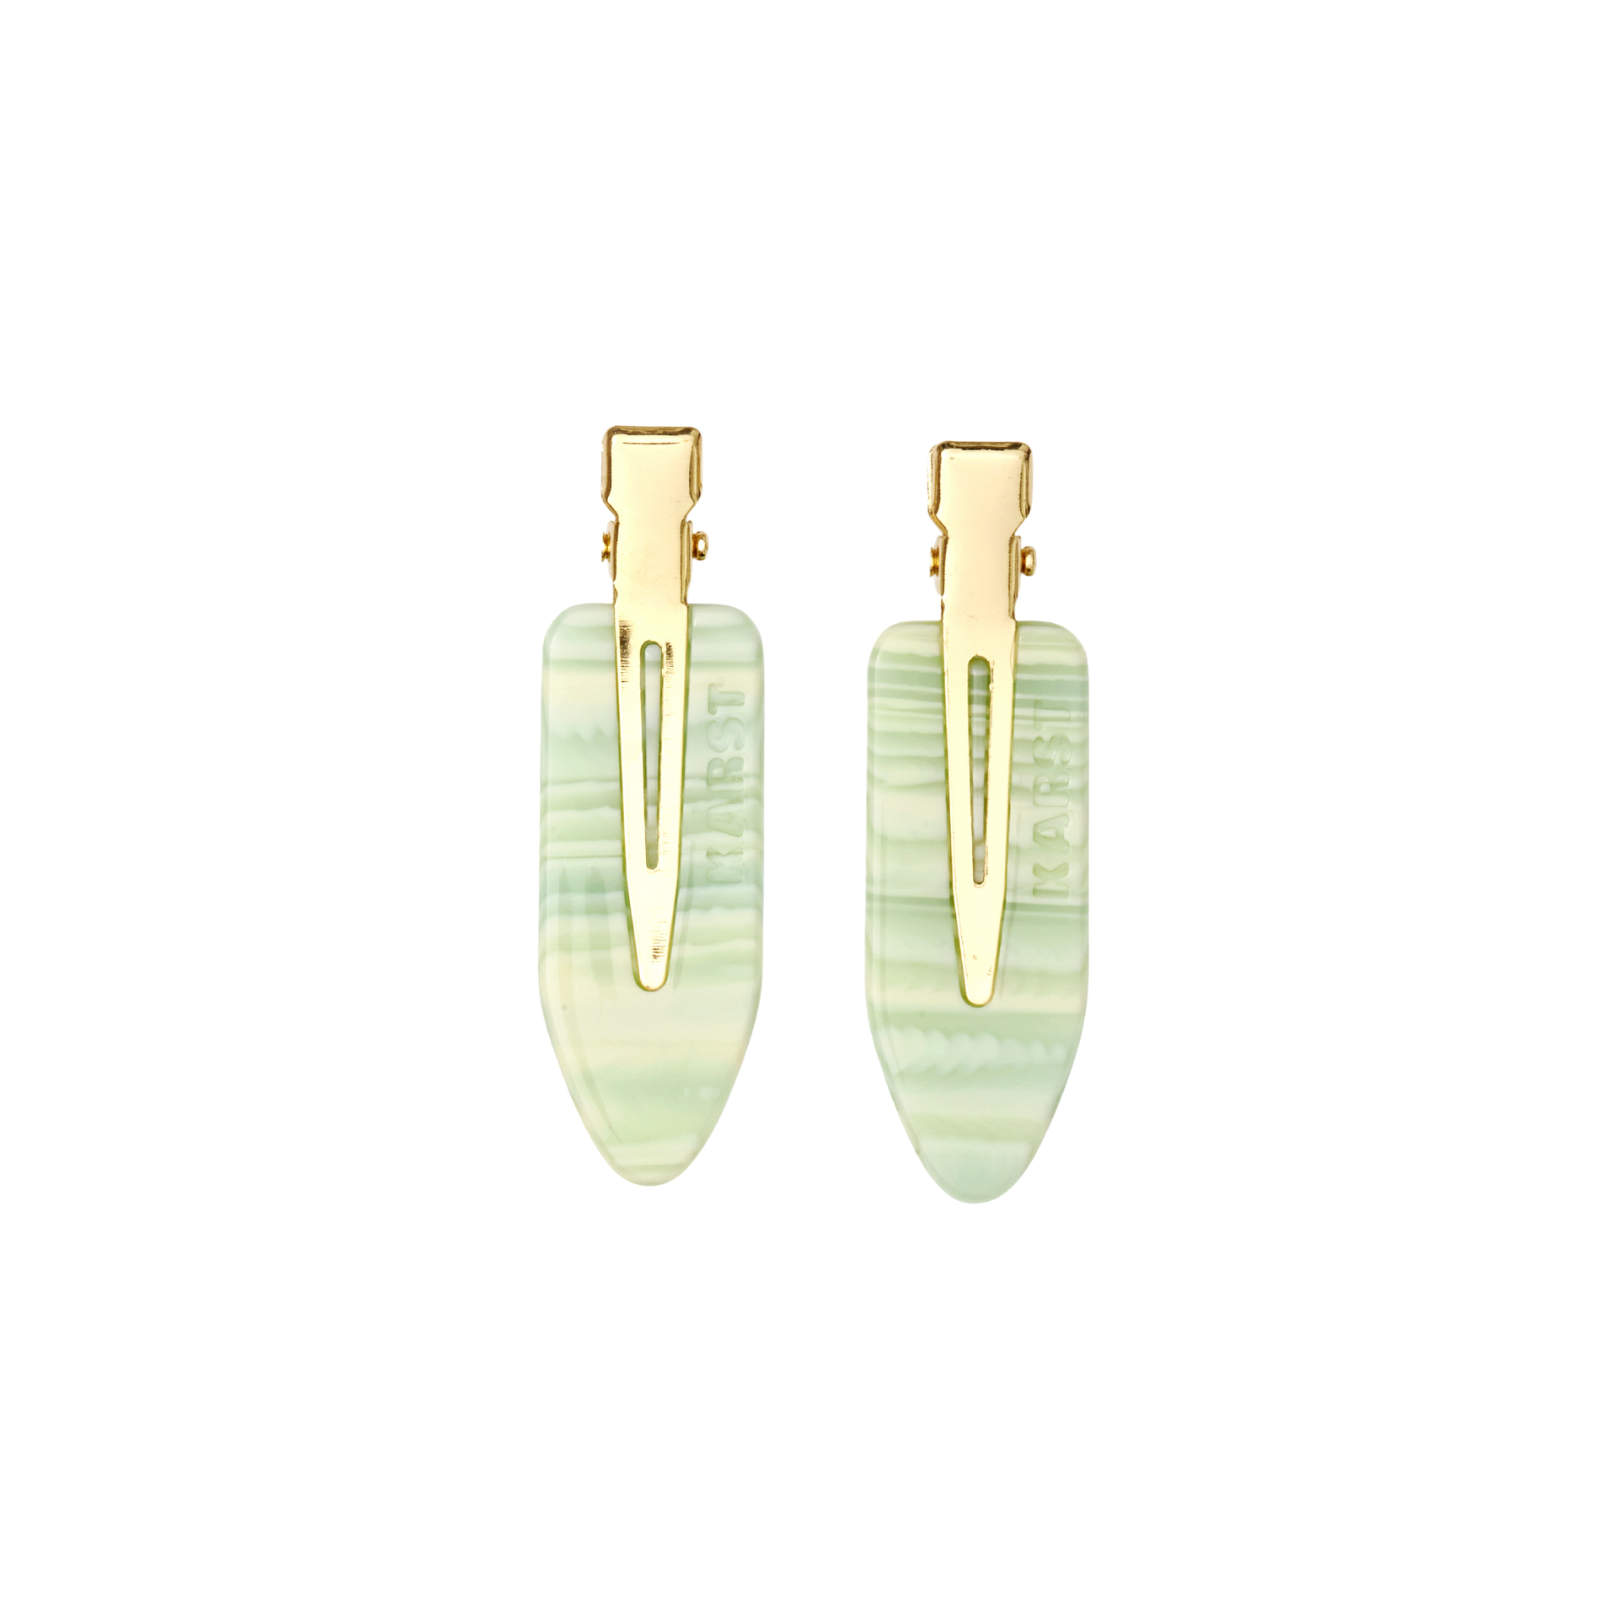 The Creaseless Clips in Minty (Set of 2)